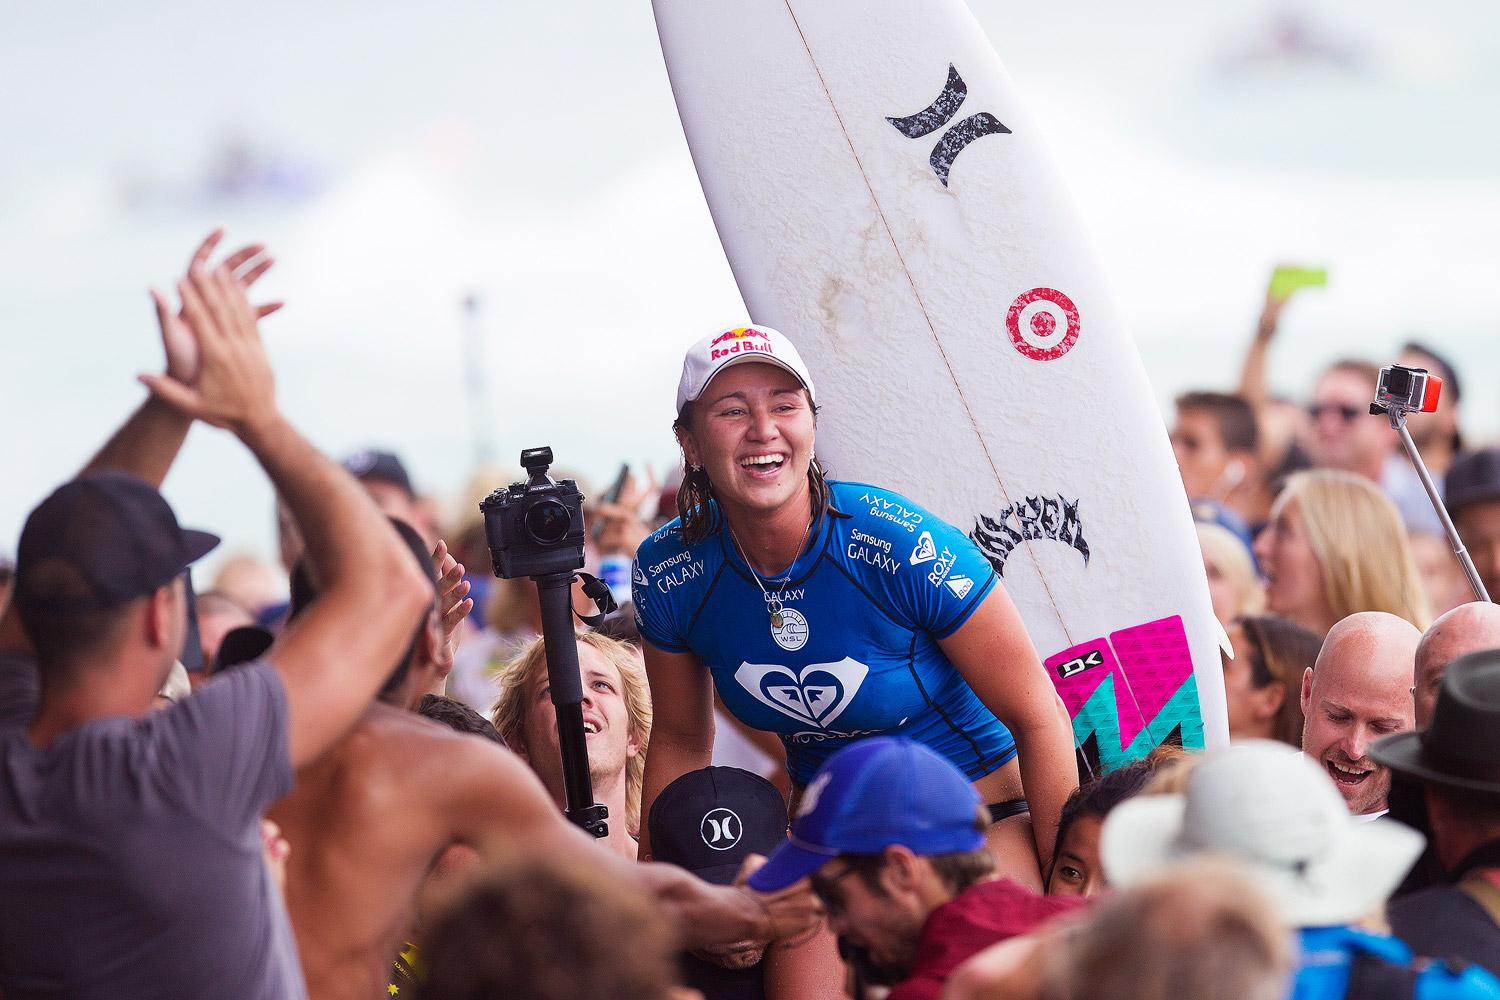 Finals Day at the #ROXYpro Gold Coast